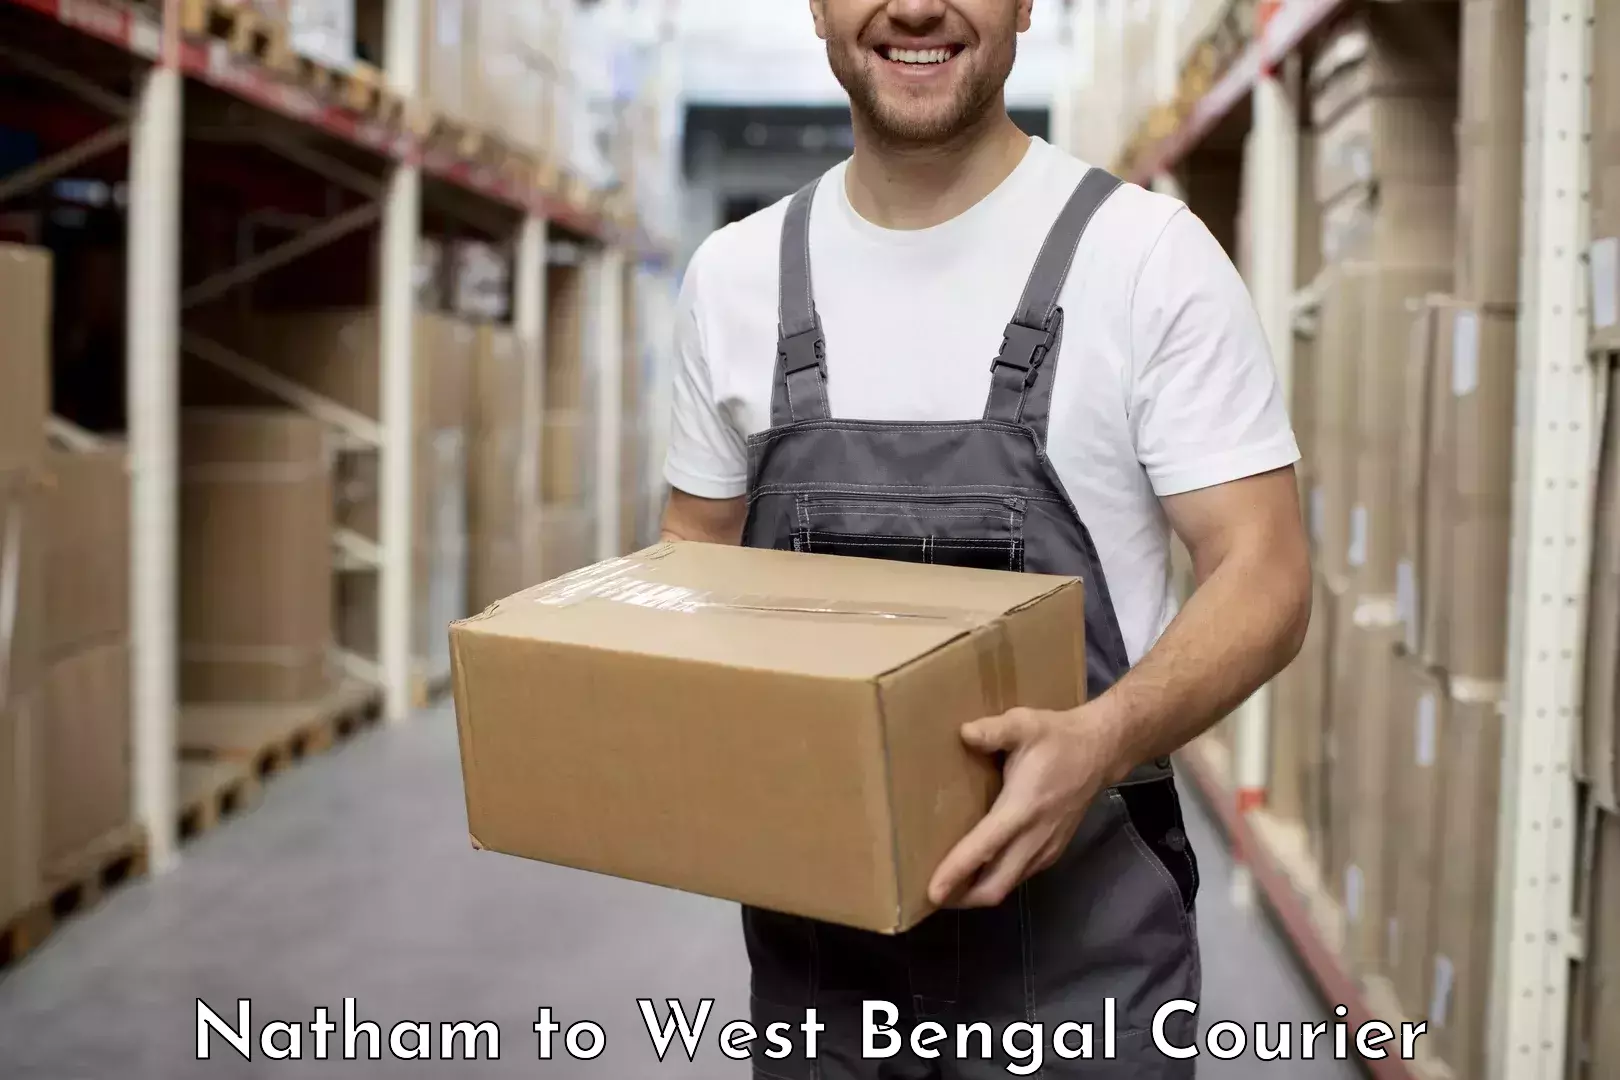 Global courier networks Natham to The University of Burdwan Barddhaman